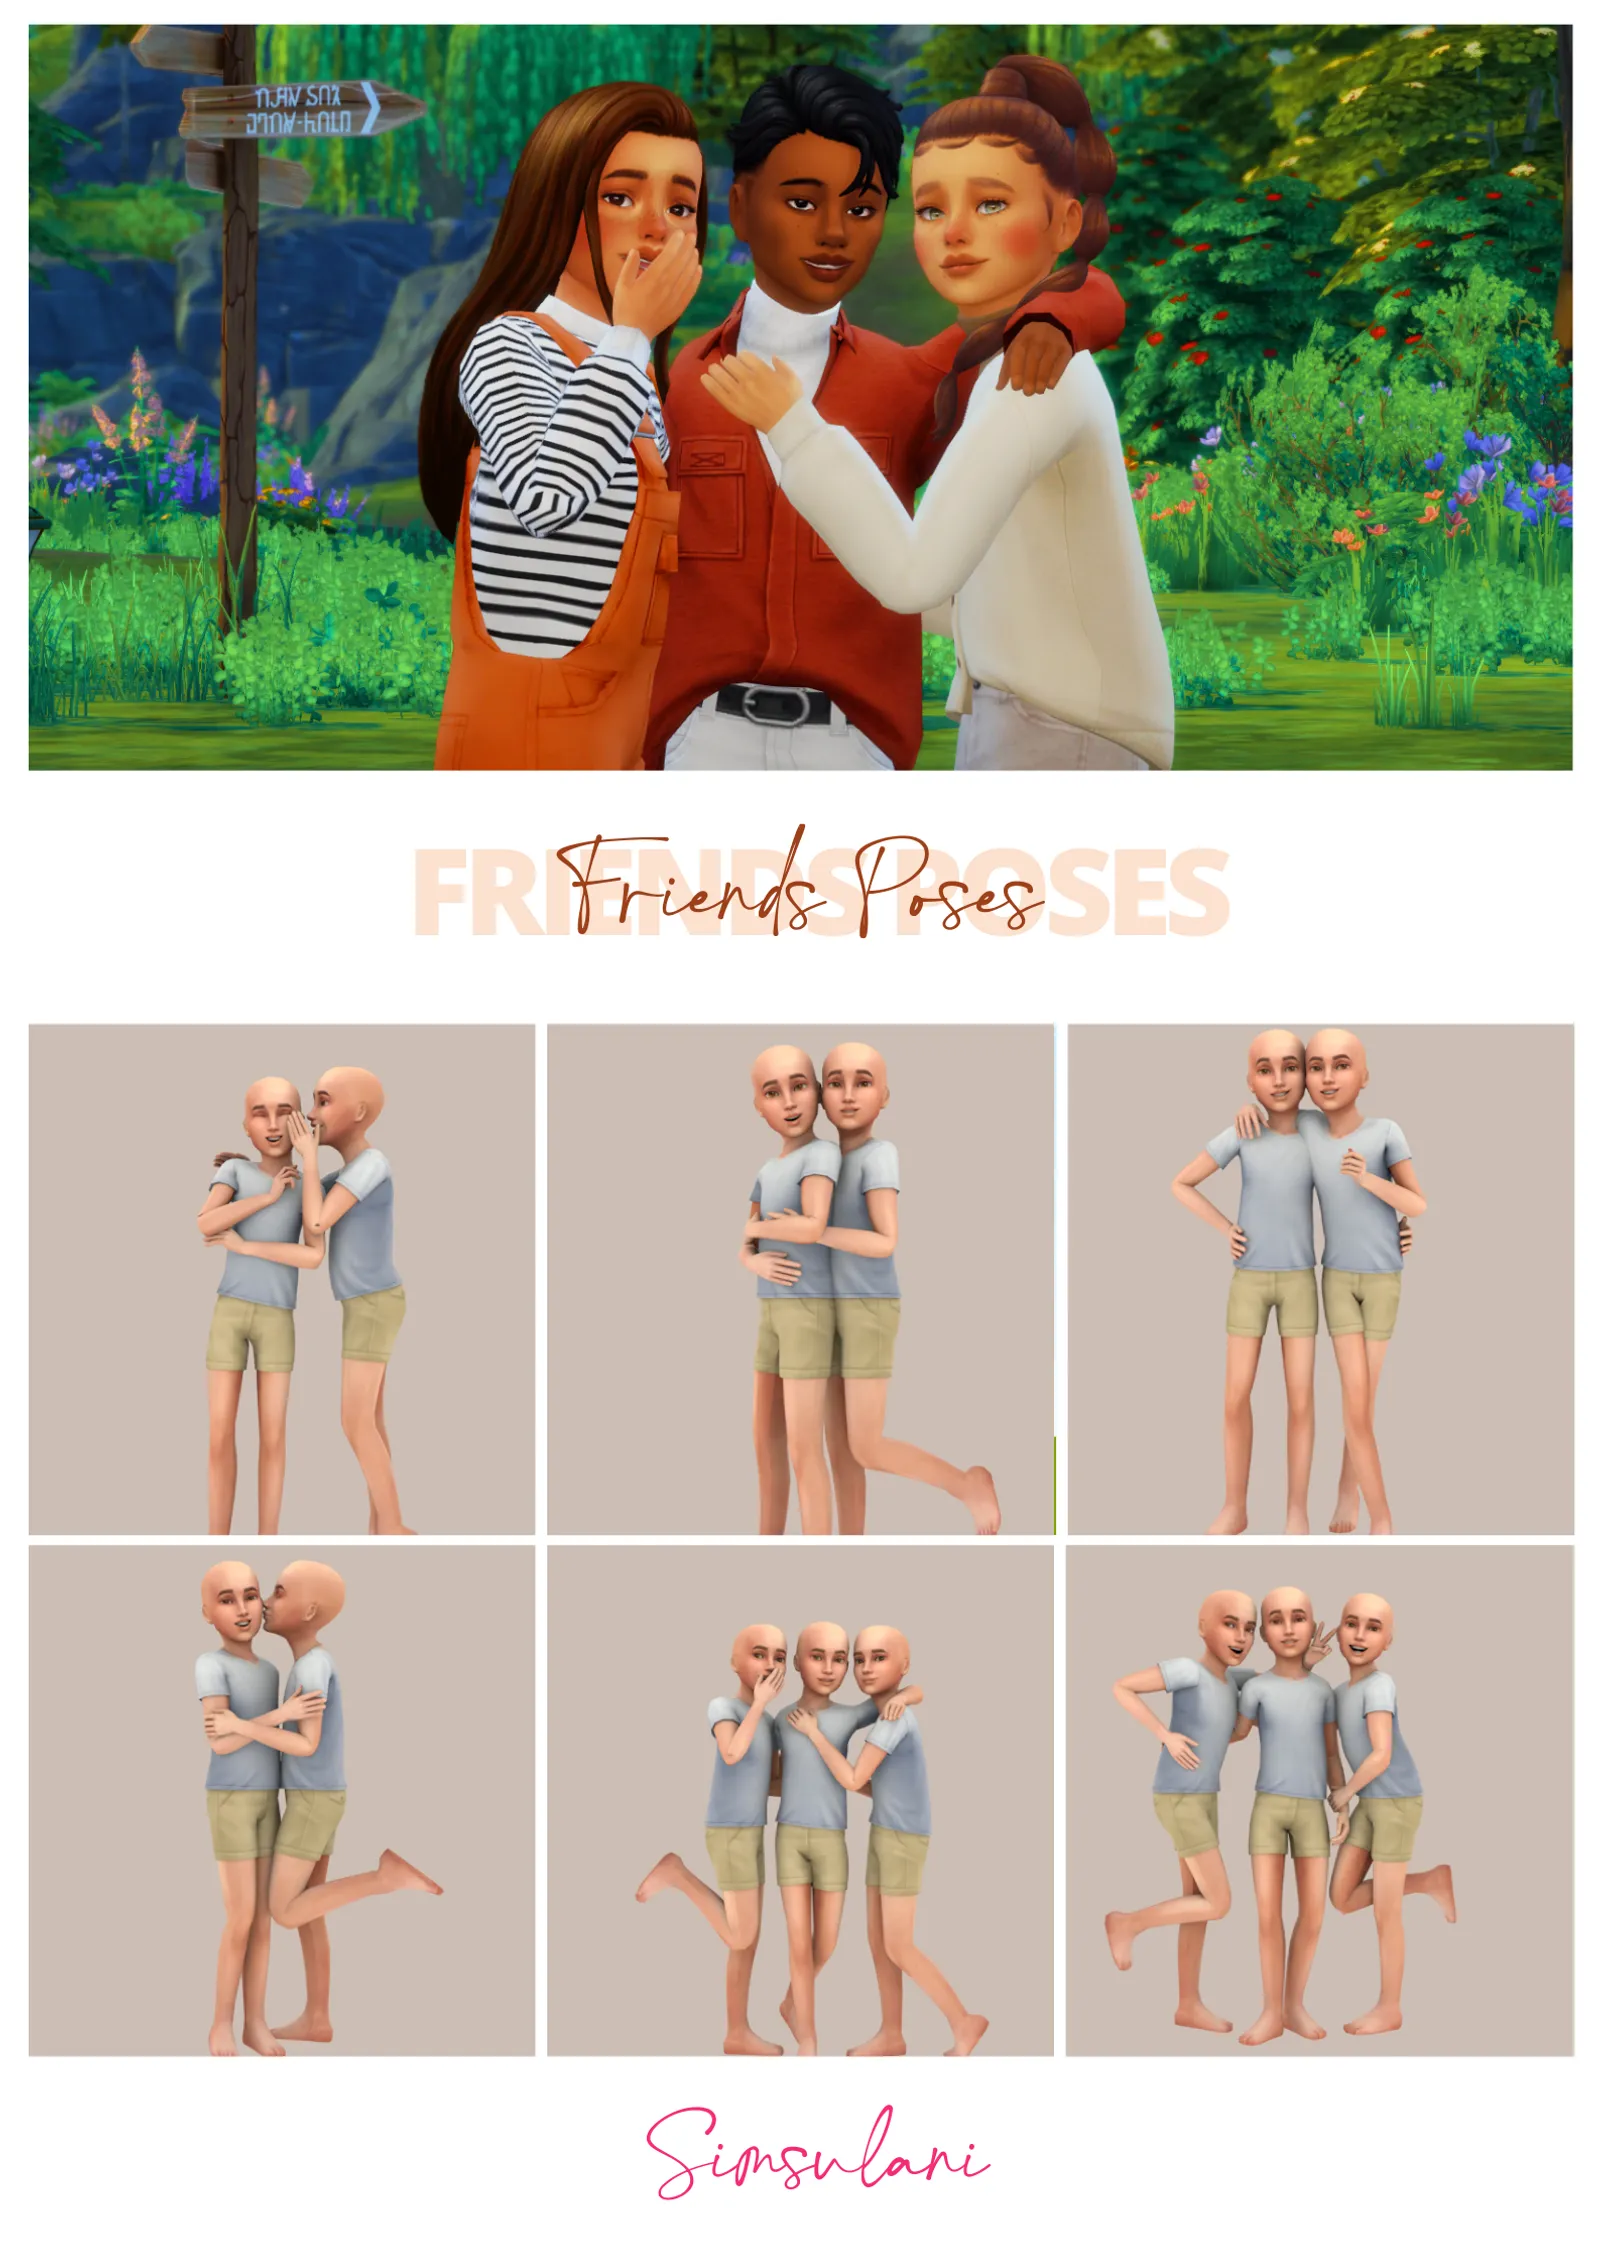 #288 Pose Pack | Friends Poses